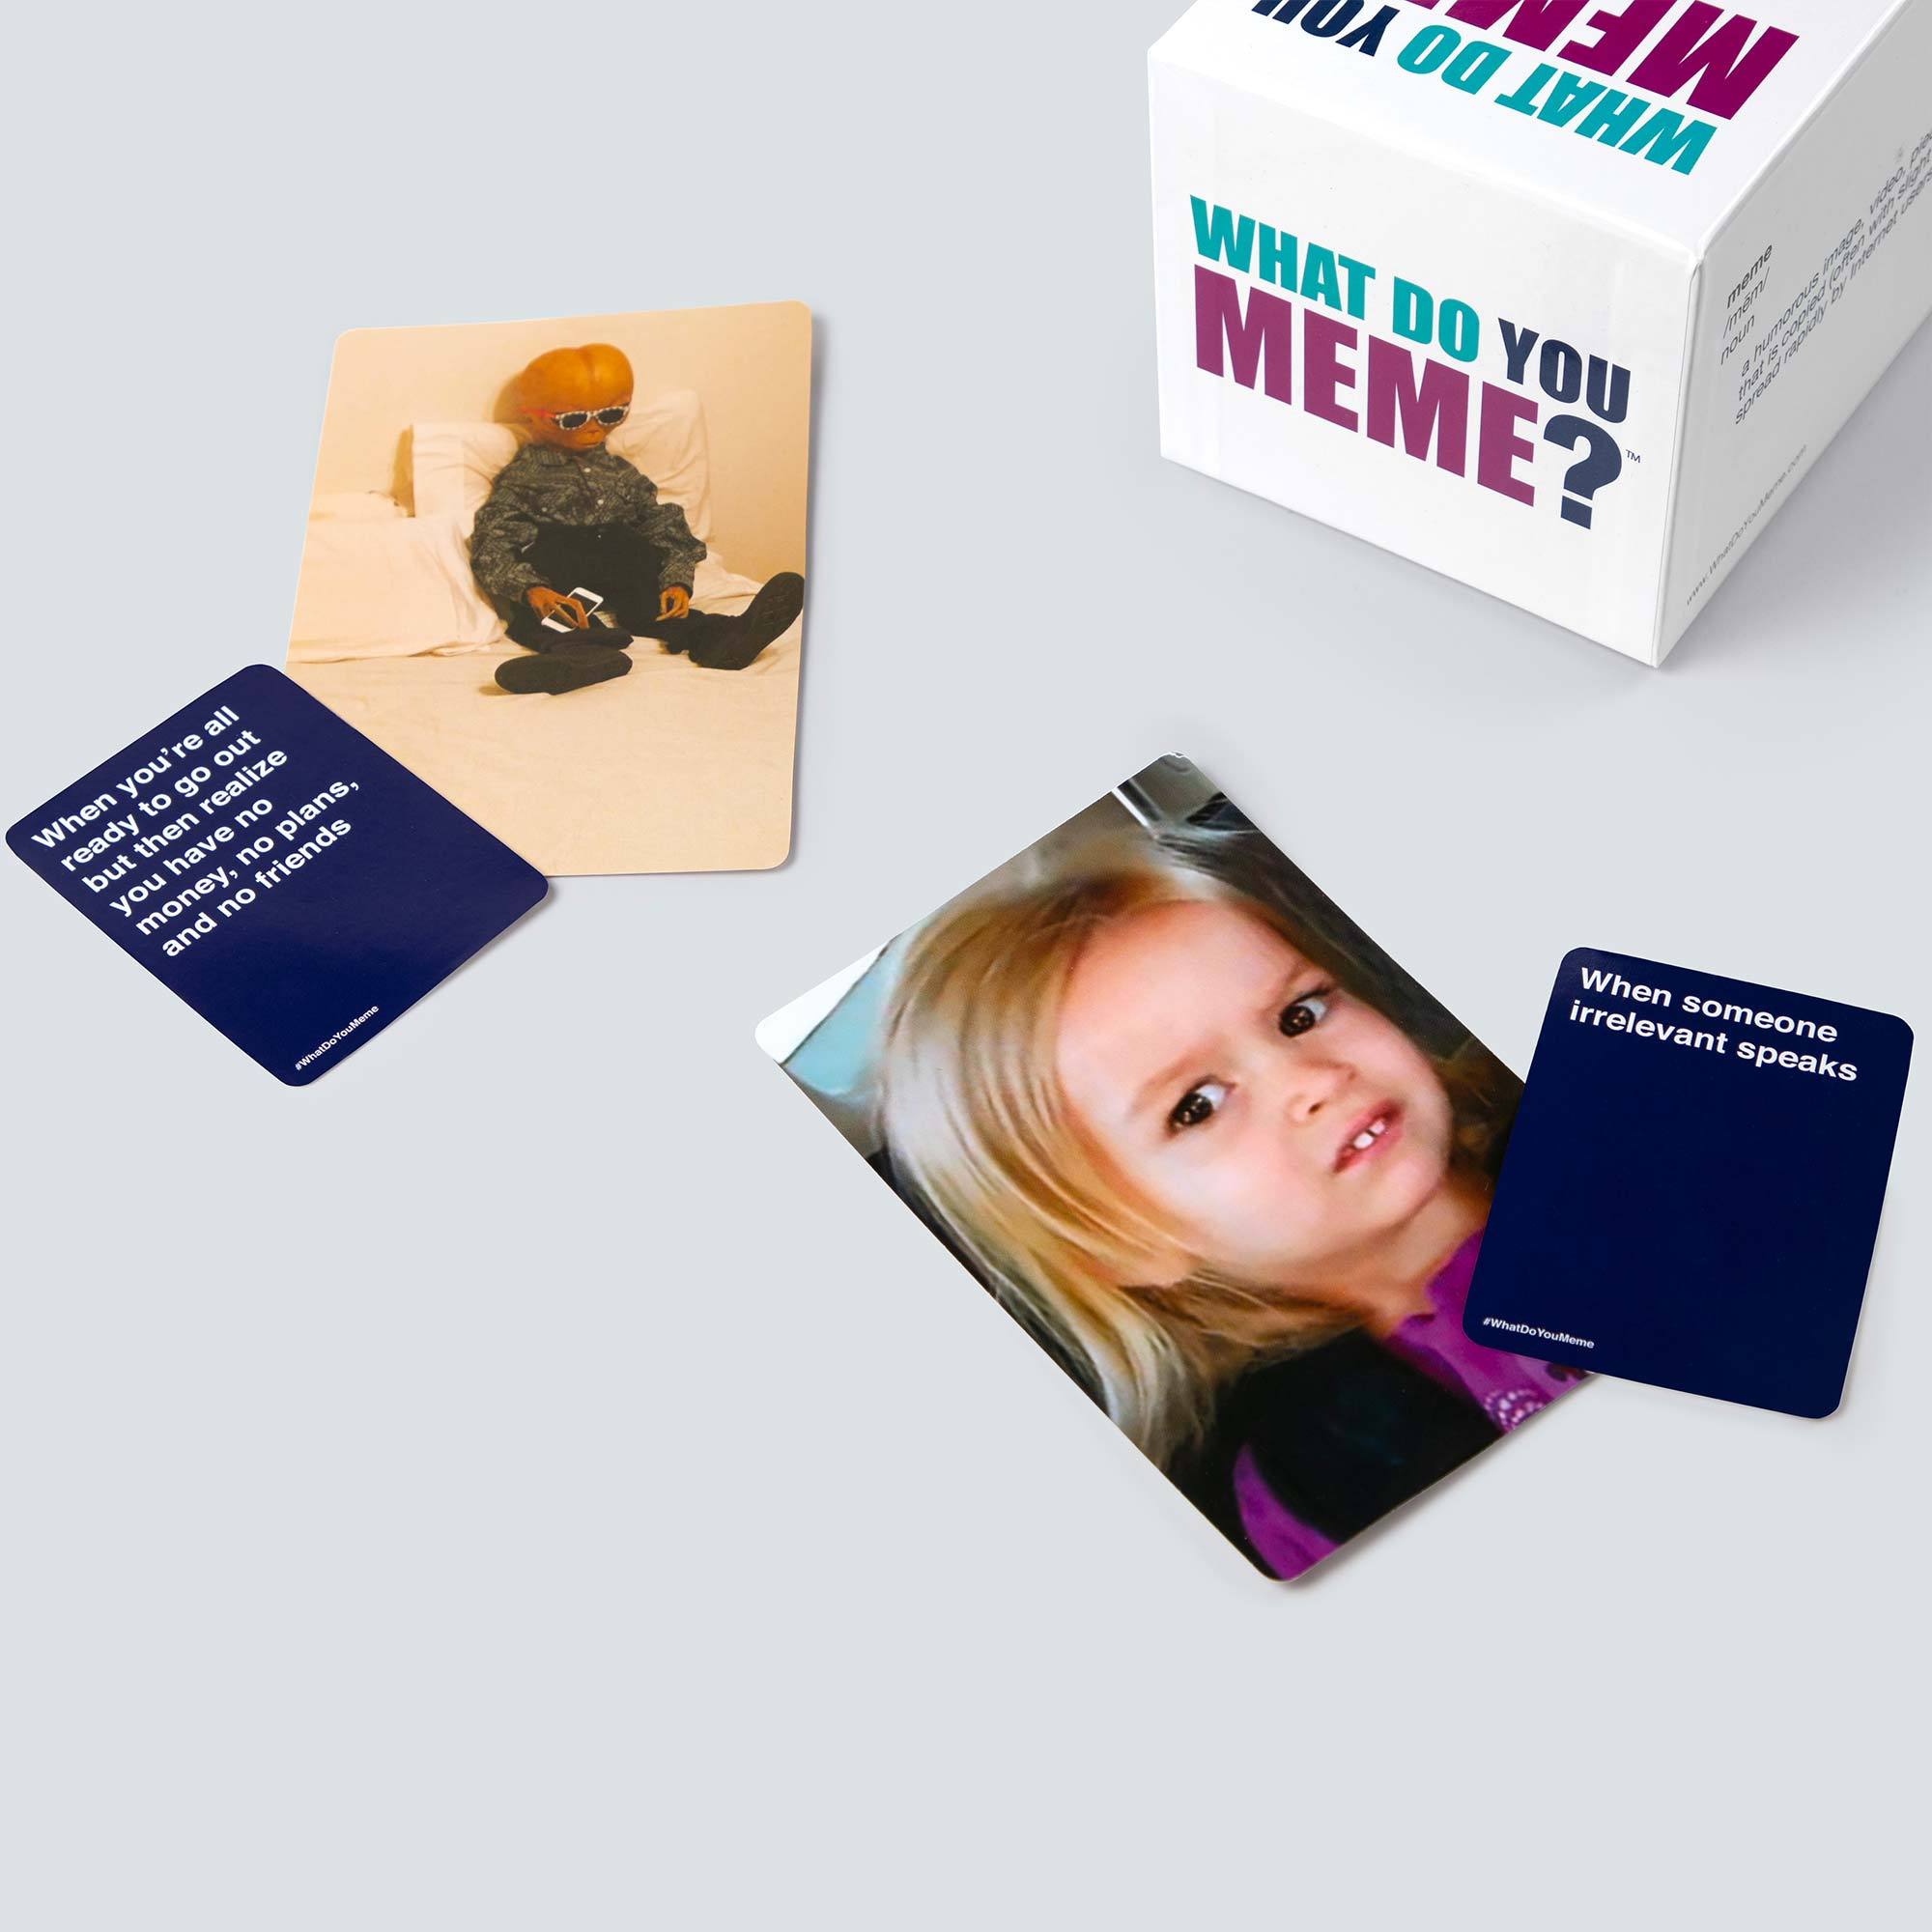 WHAT DO YOU MEME? Core Game - The Hilarious Adult Party Game for Meme Lovers